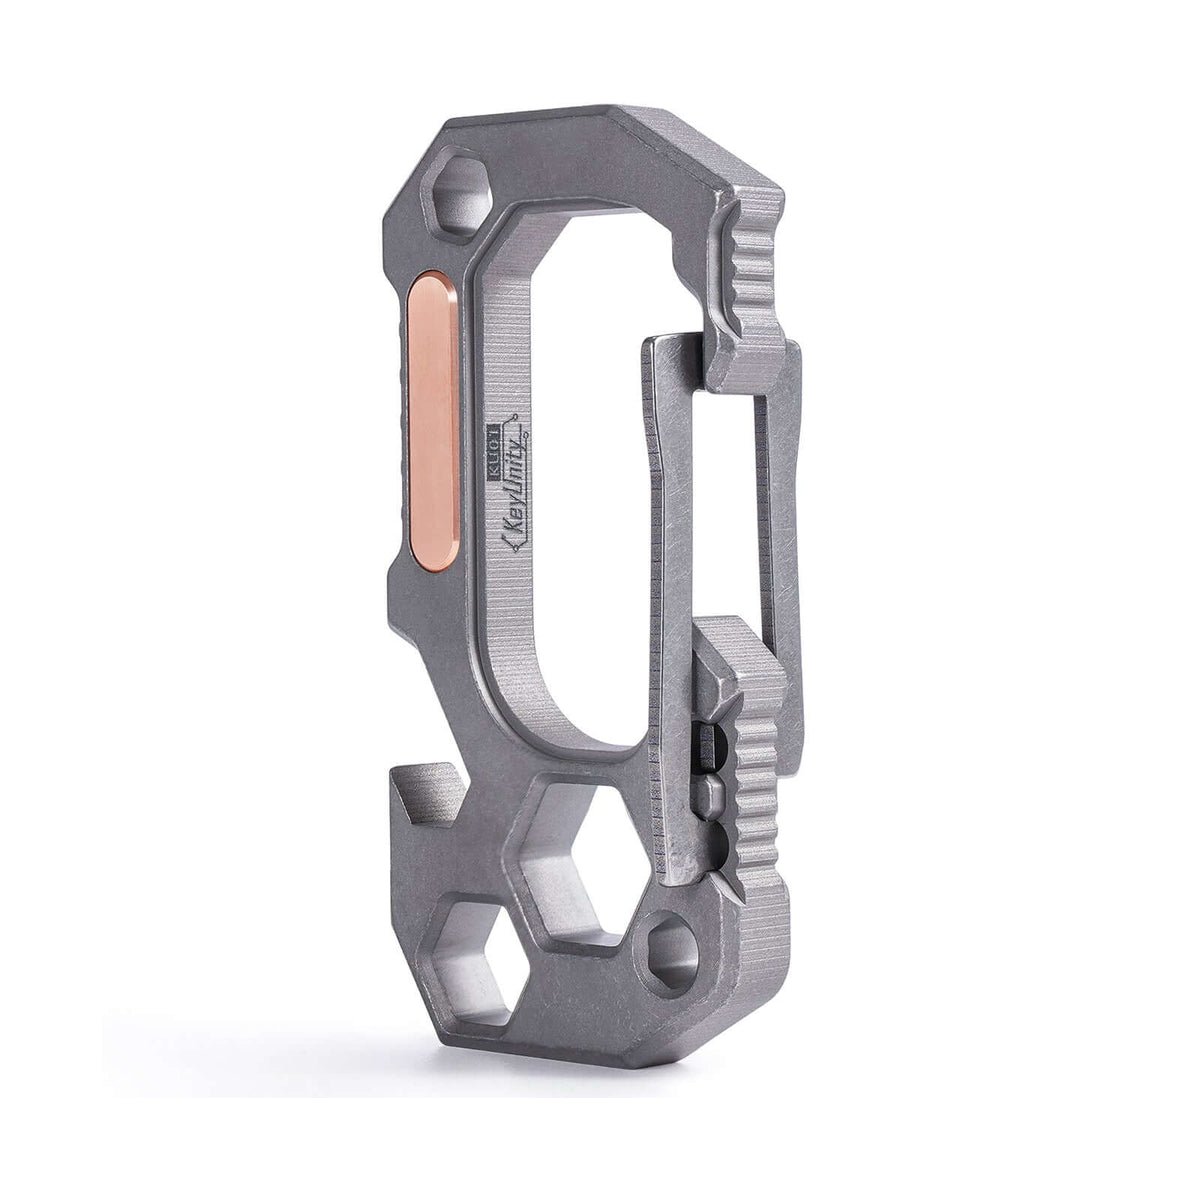 KU01 Titanium Alloy Carabiner Clip with Wrench